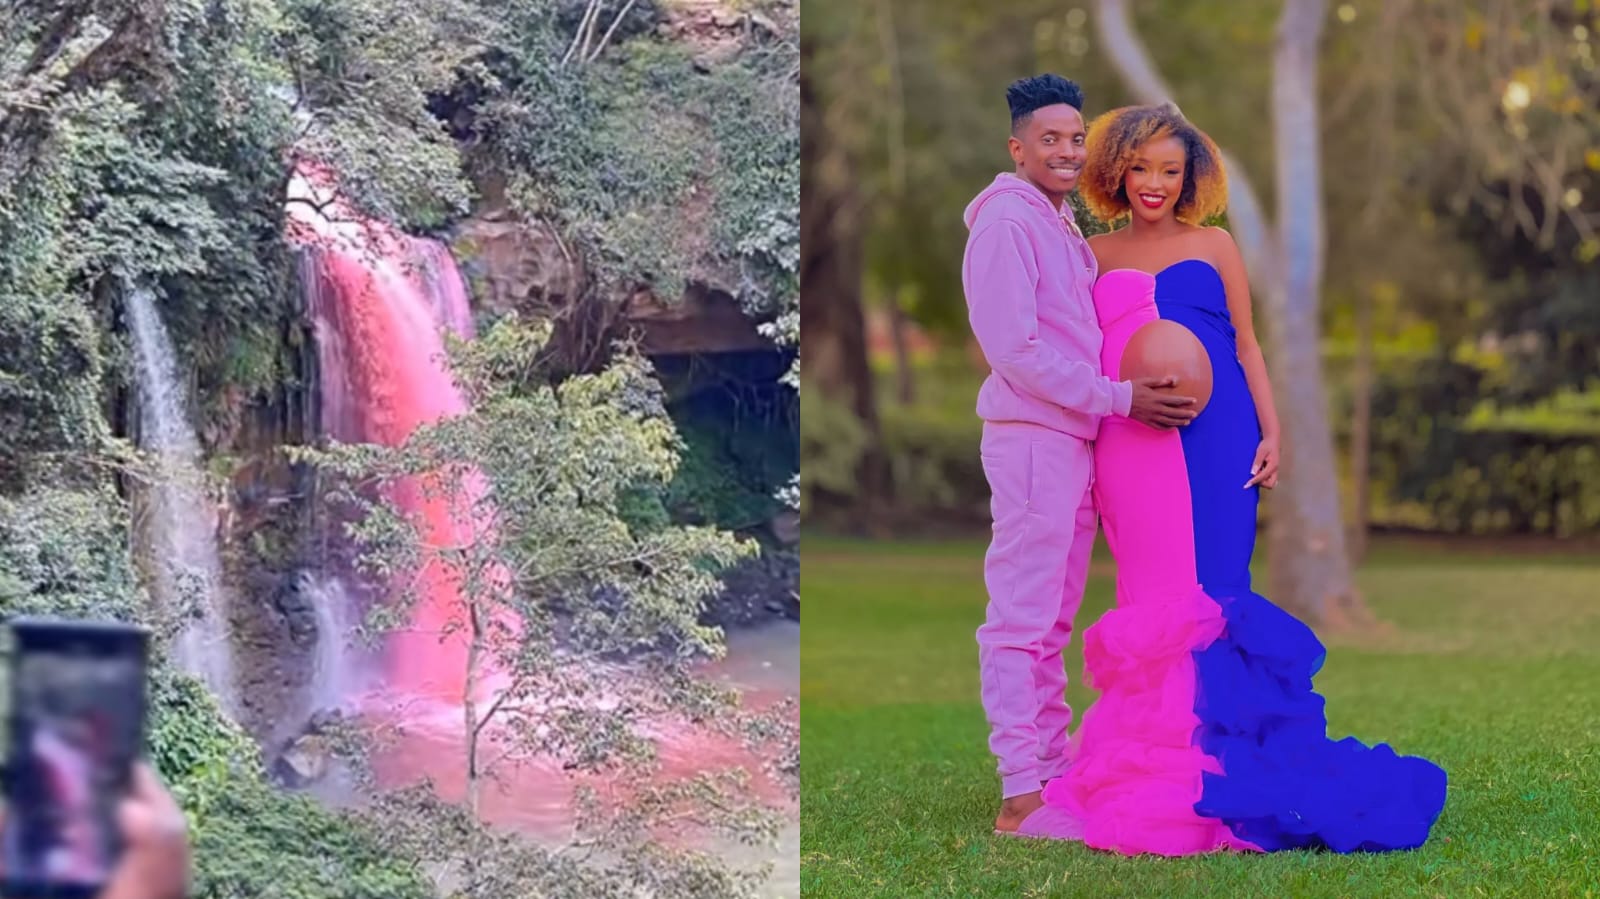 Eric Omondi and his girlfriend Lynne at their gender reveal party